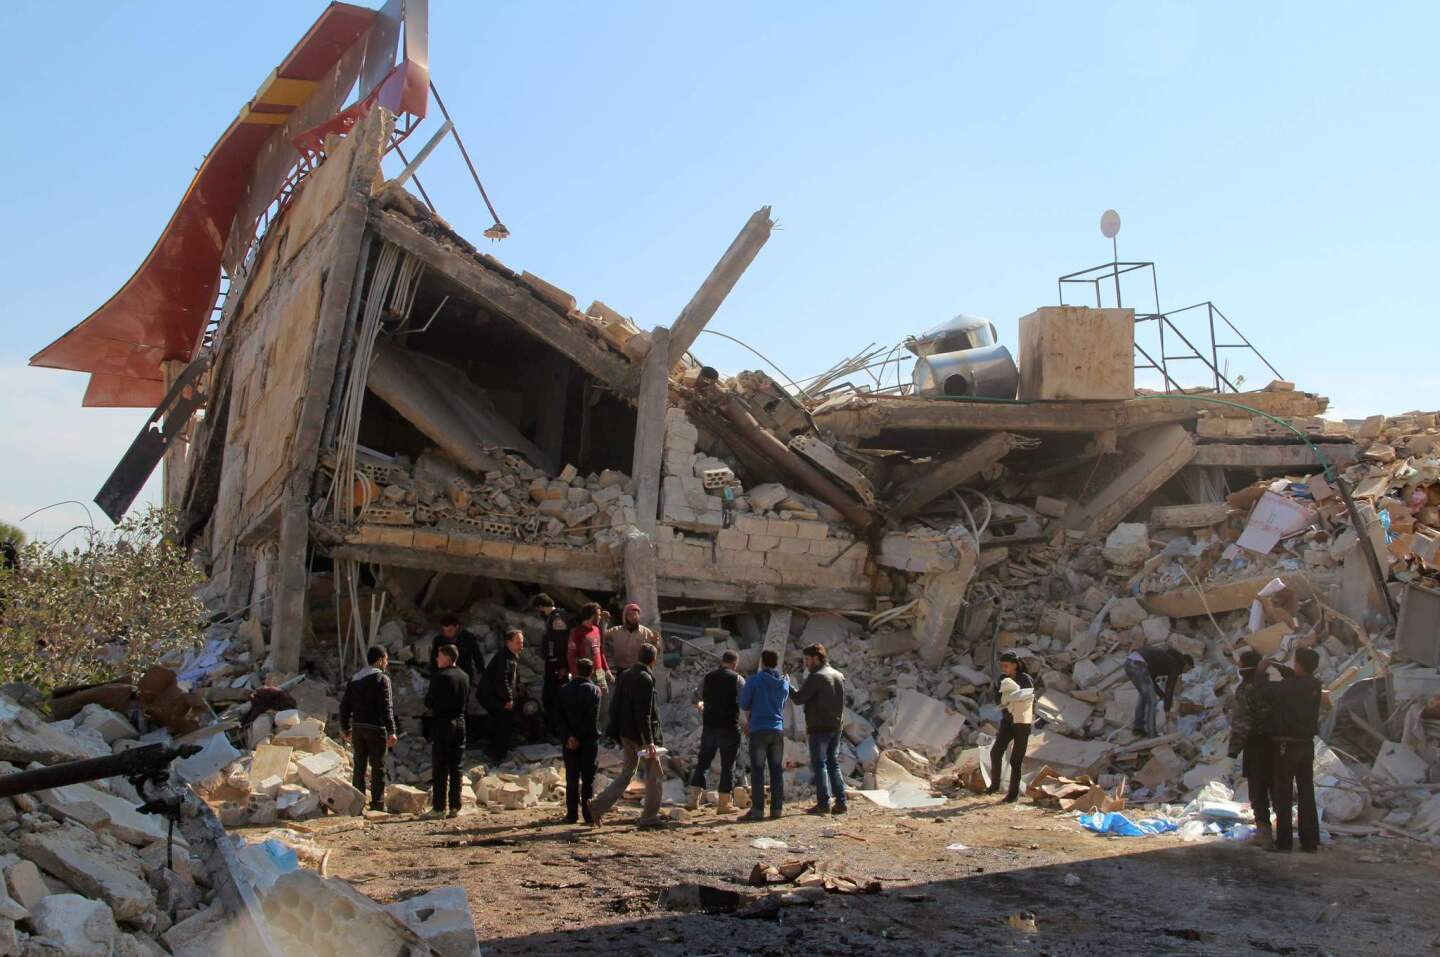 People gather around the rubble of a hospital supported by Doctors Without Borders near Maaret al-Numan, in Syria's northern province of Idlib, on Feb. 15, 2016, after the building was hit by suspected Russian airstrikes.